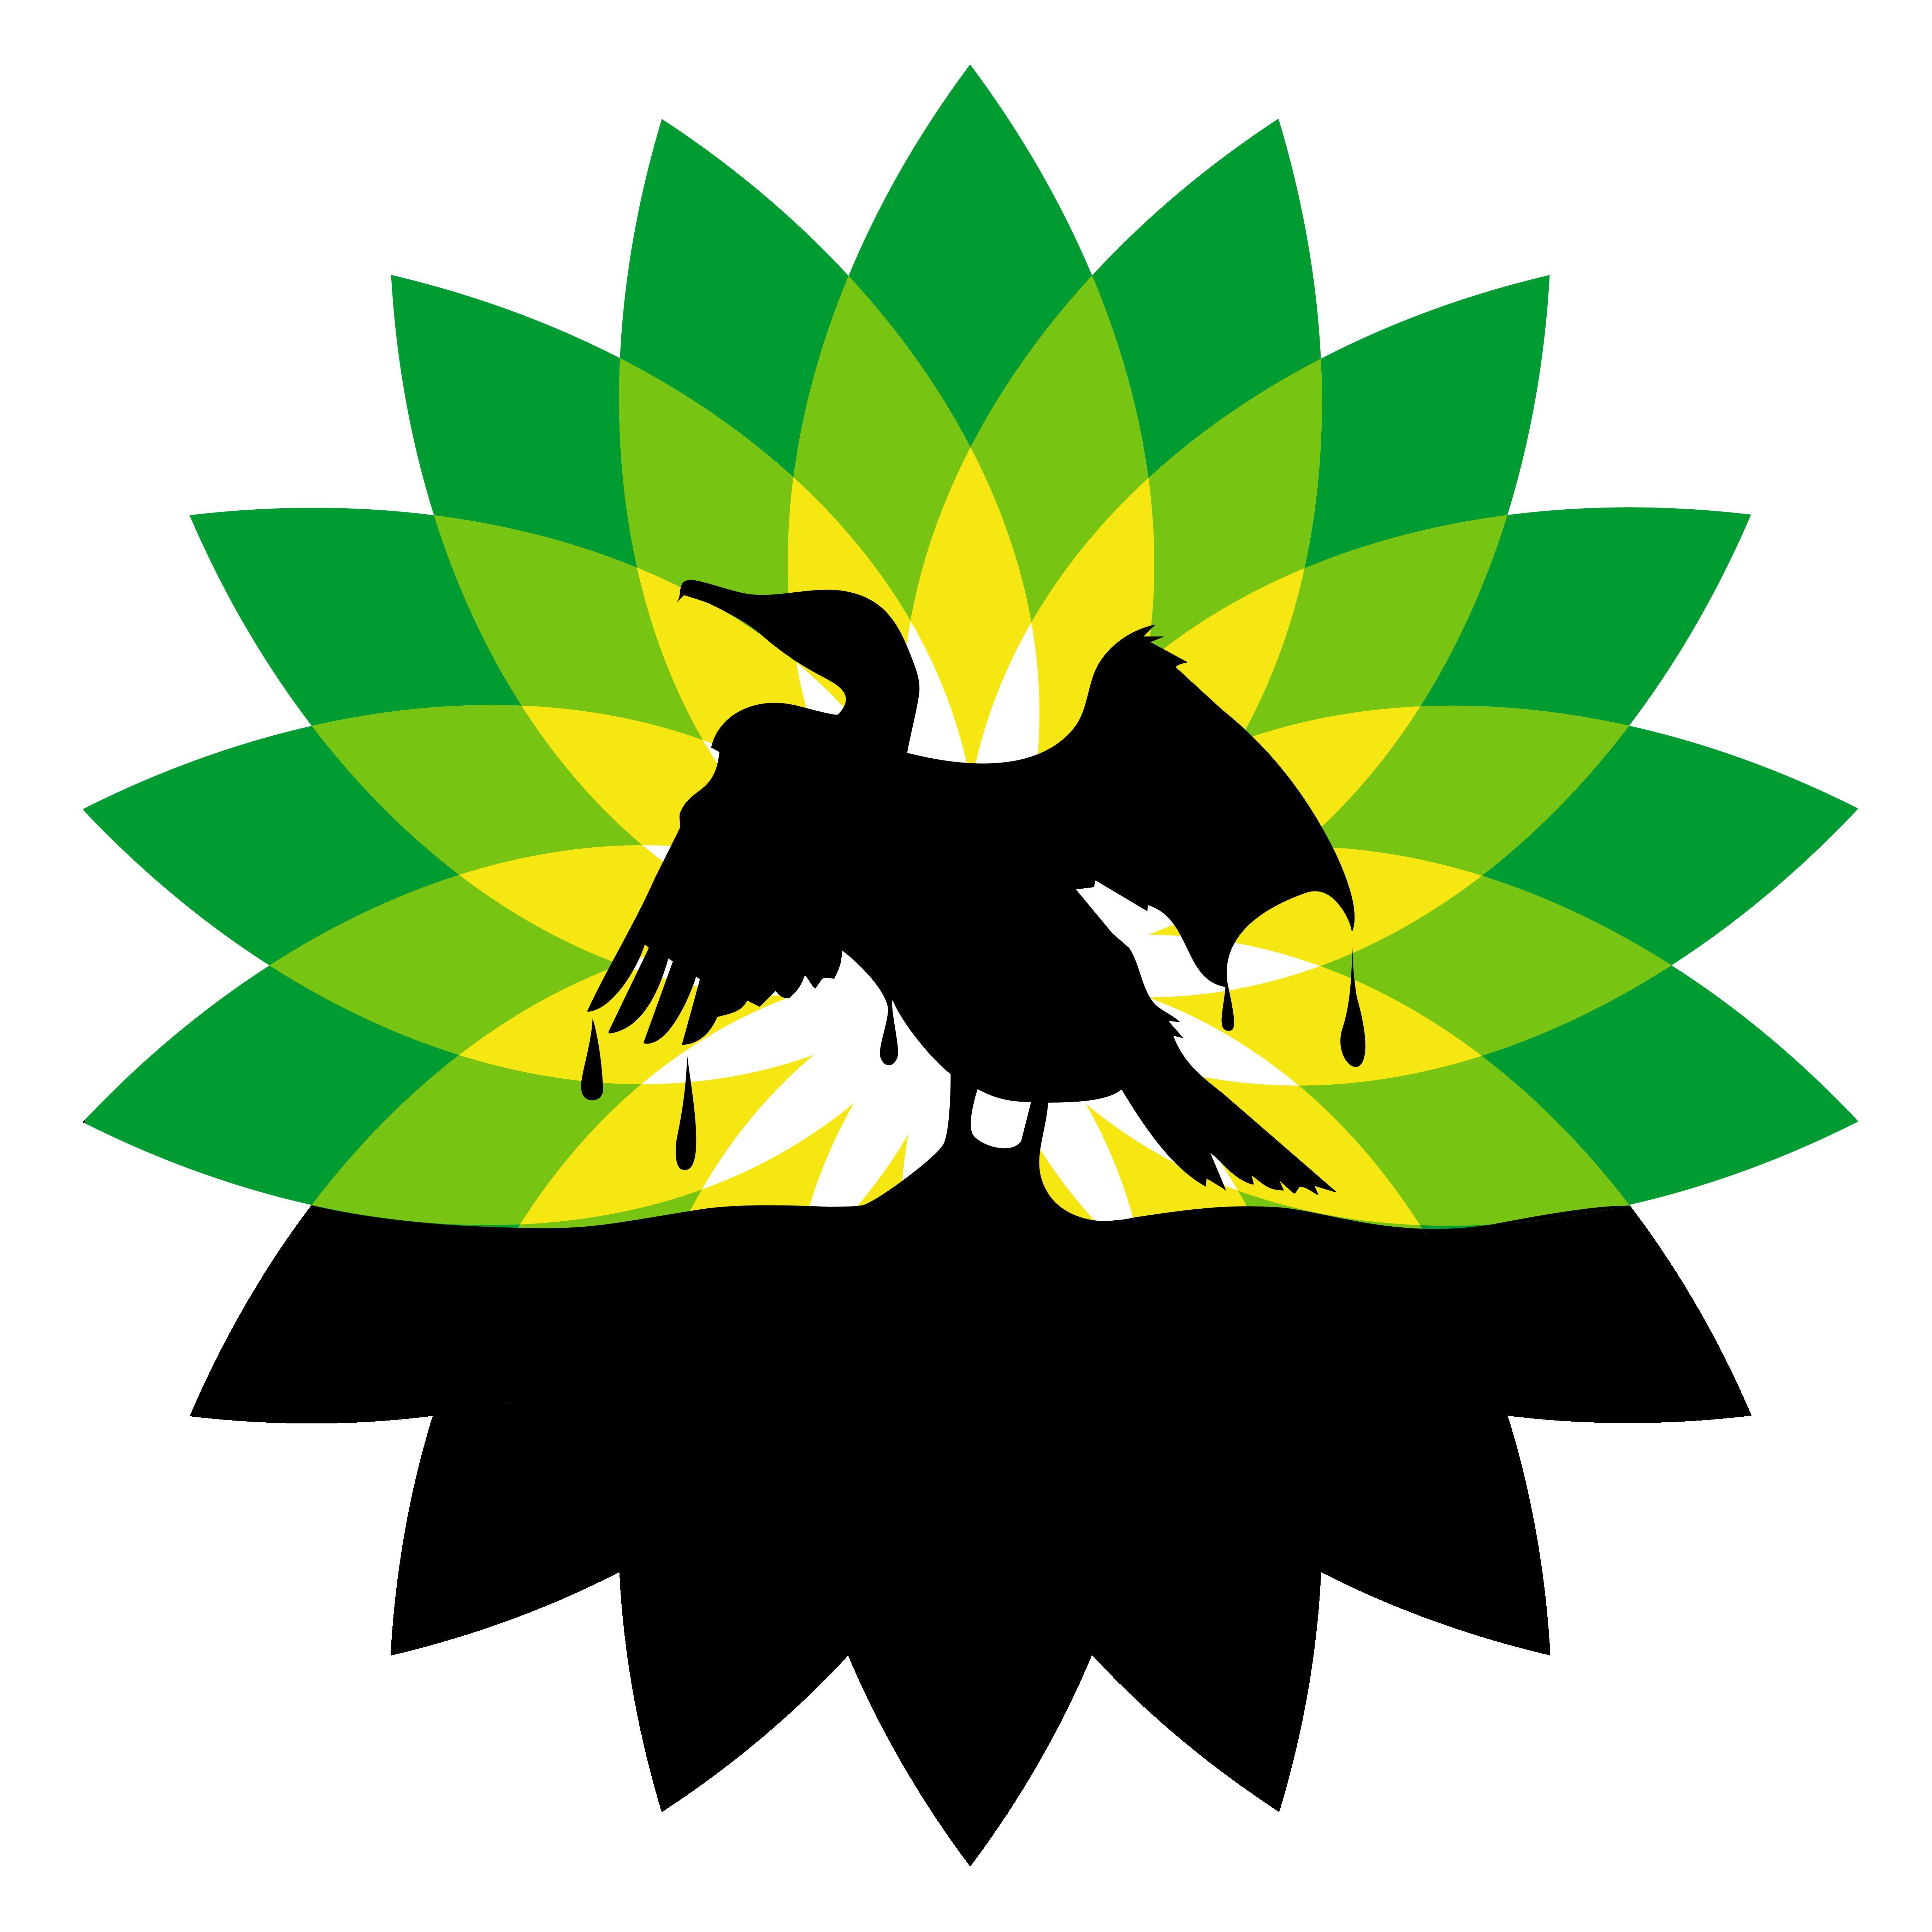 BP Green Logo - The Wrong Words End Careers - Crystal Clear Communications